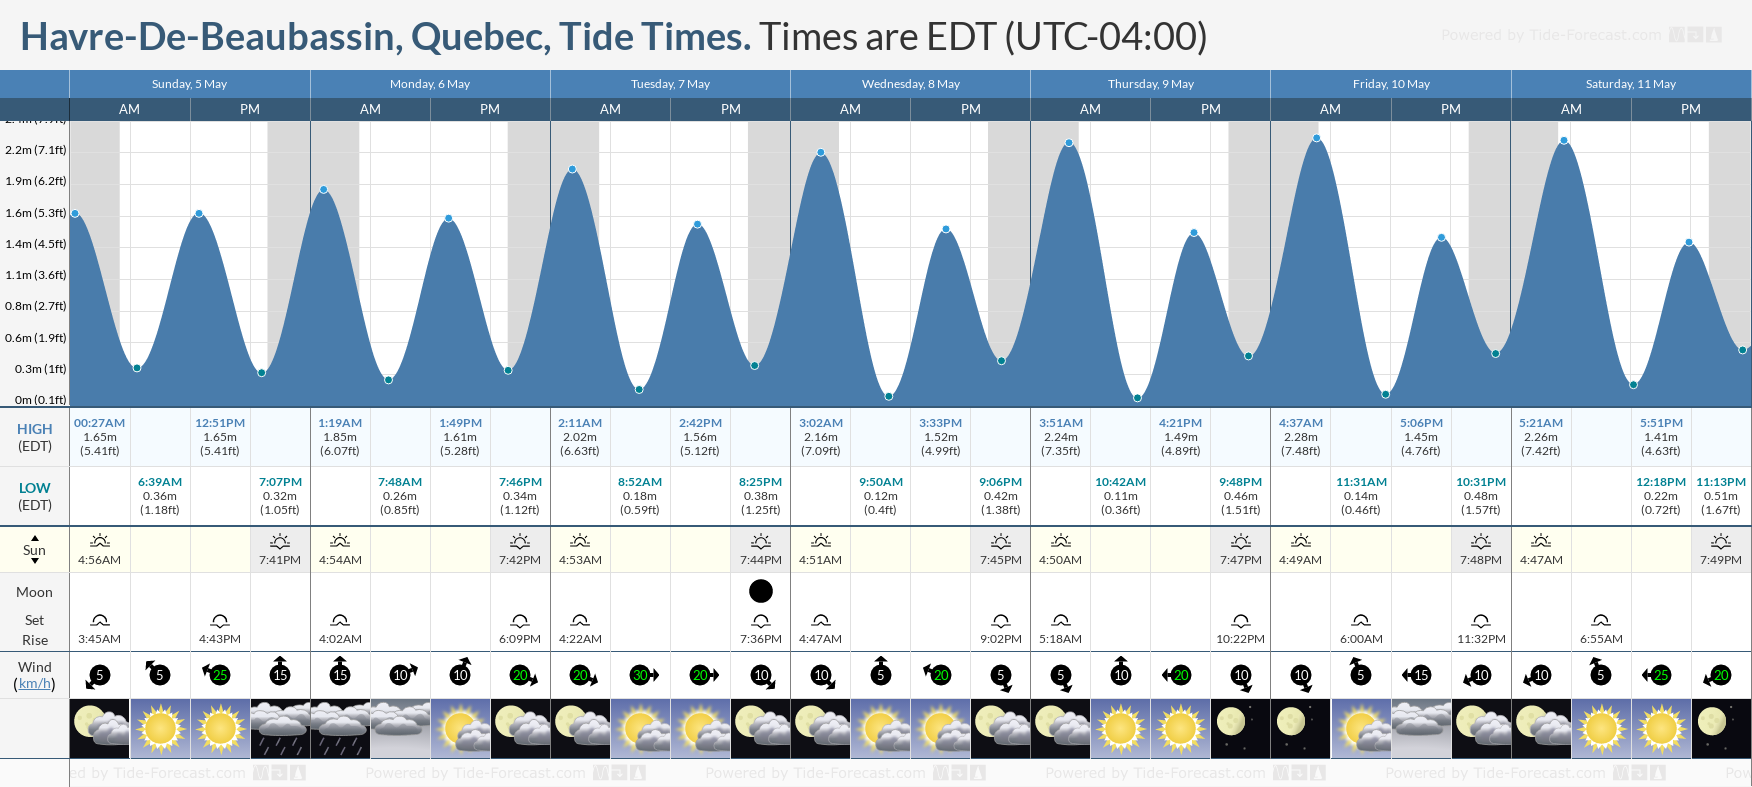 Havre-De-Beaubassin, Quebec Tide Chart including high and low tide times for the next 7 days